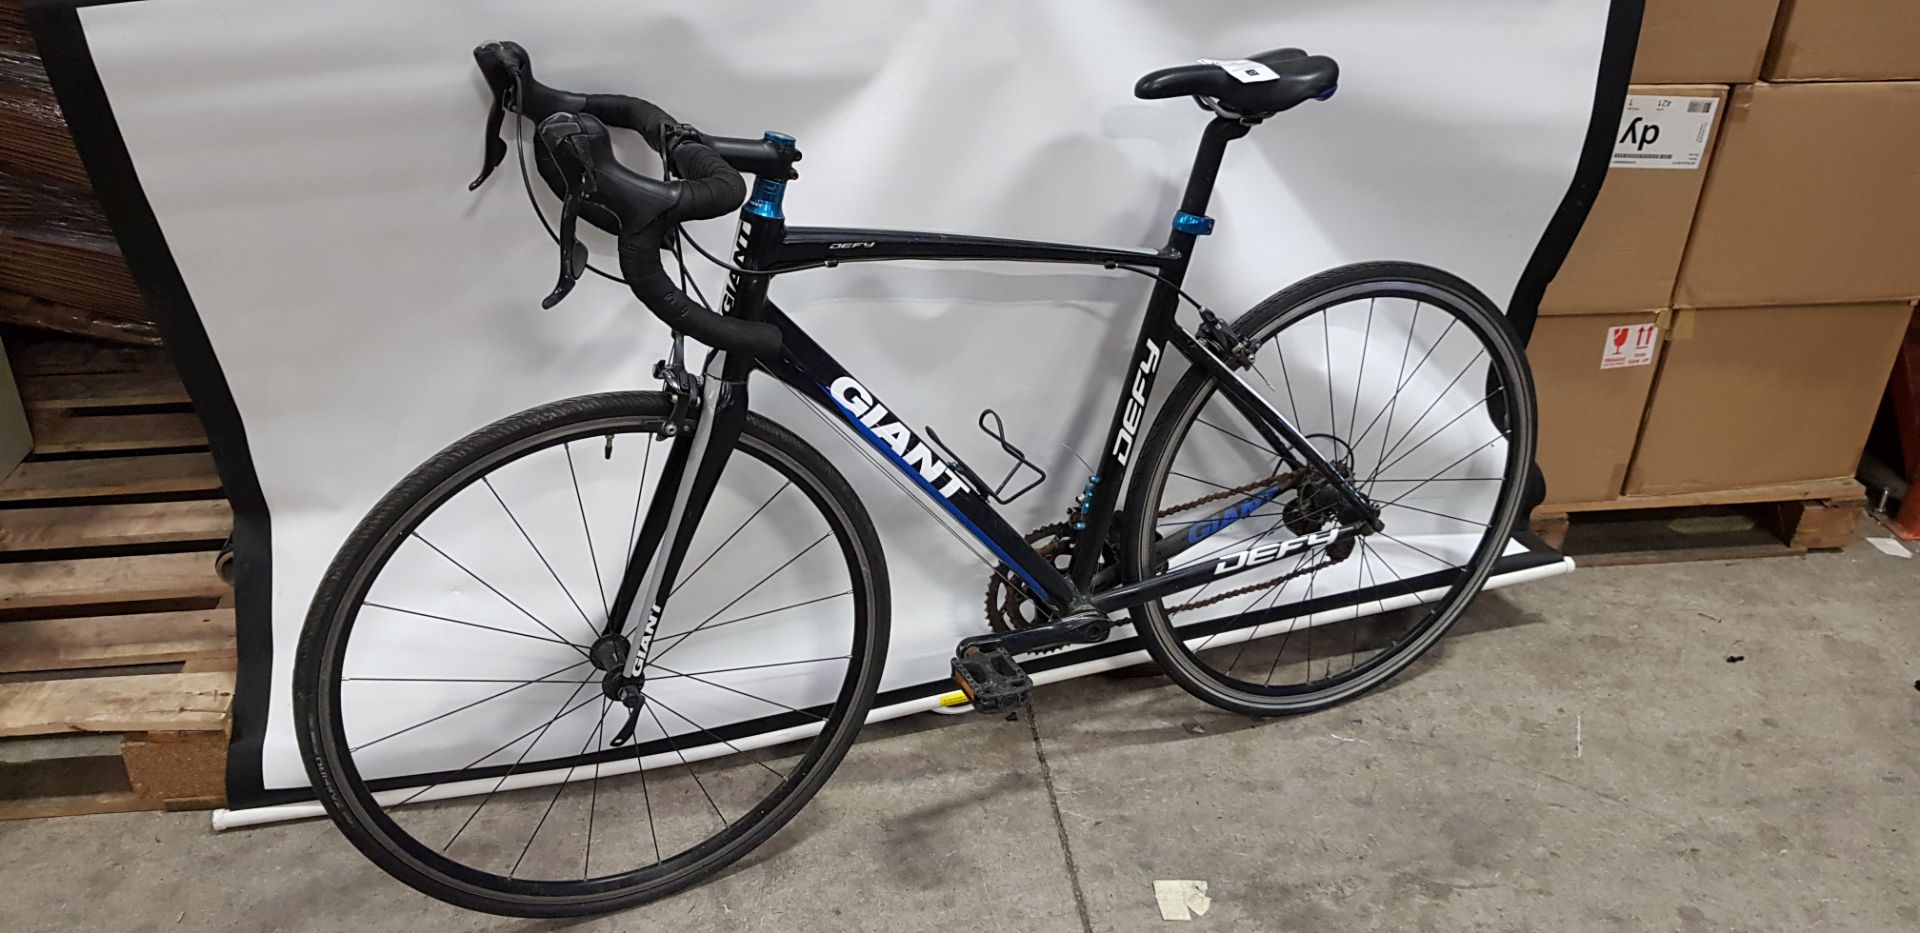 1 X GIANT DEFY ALUXX SL 6000 SERIES BUTTED TUBING ROAD BICYCLE WITH THIN TYRES ( FRAME DIMENSION